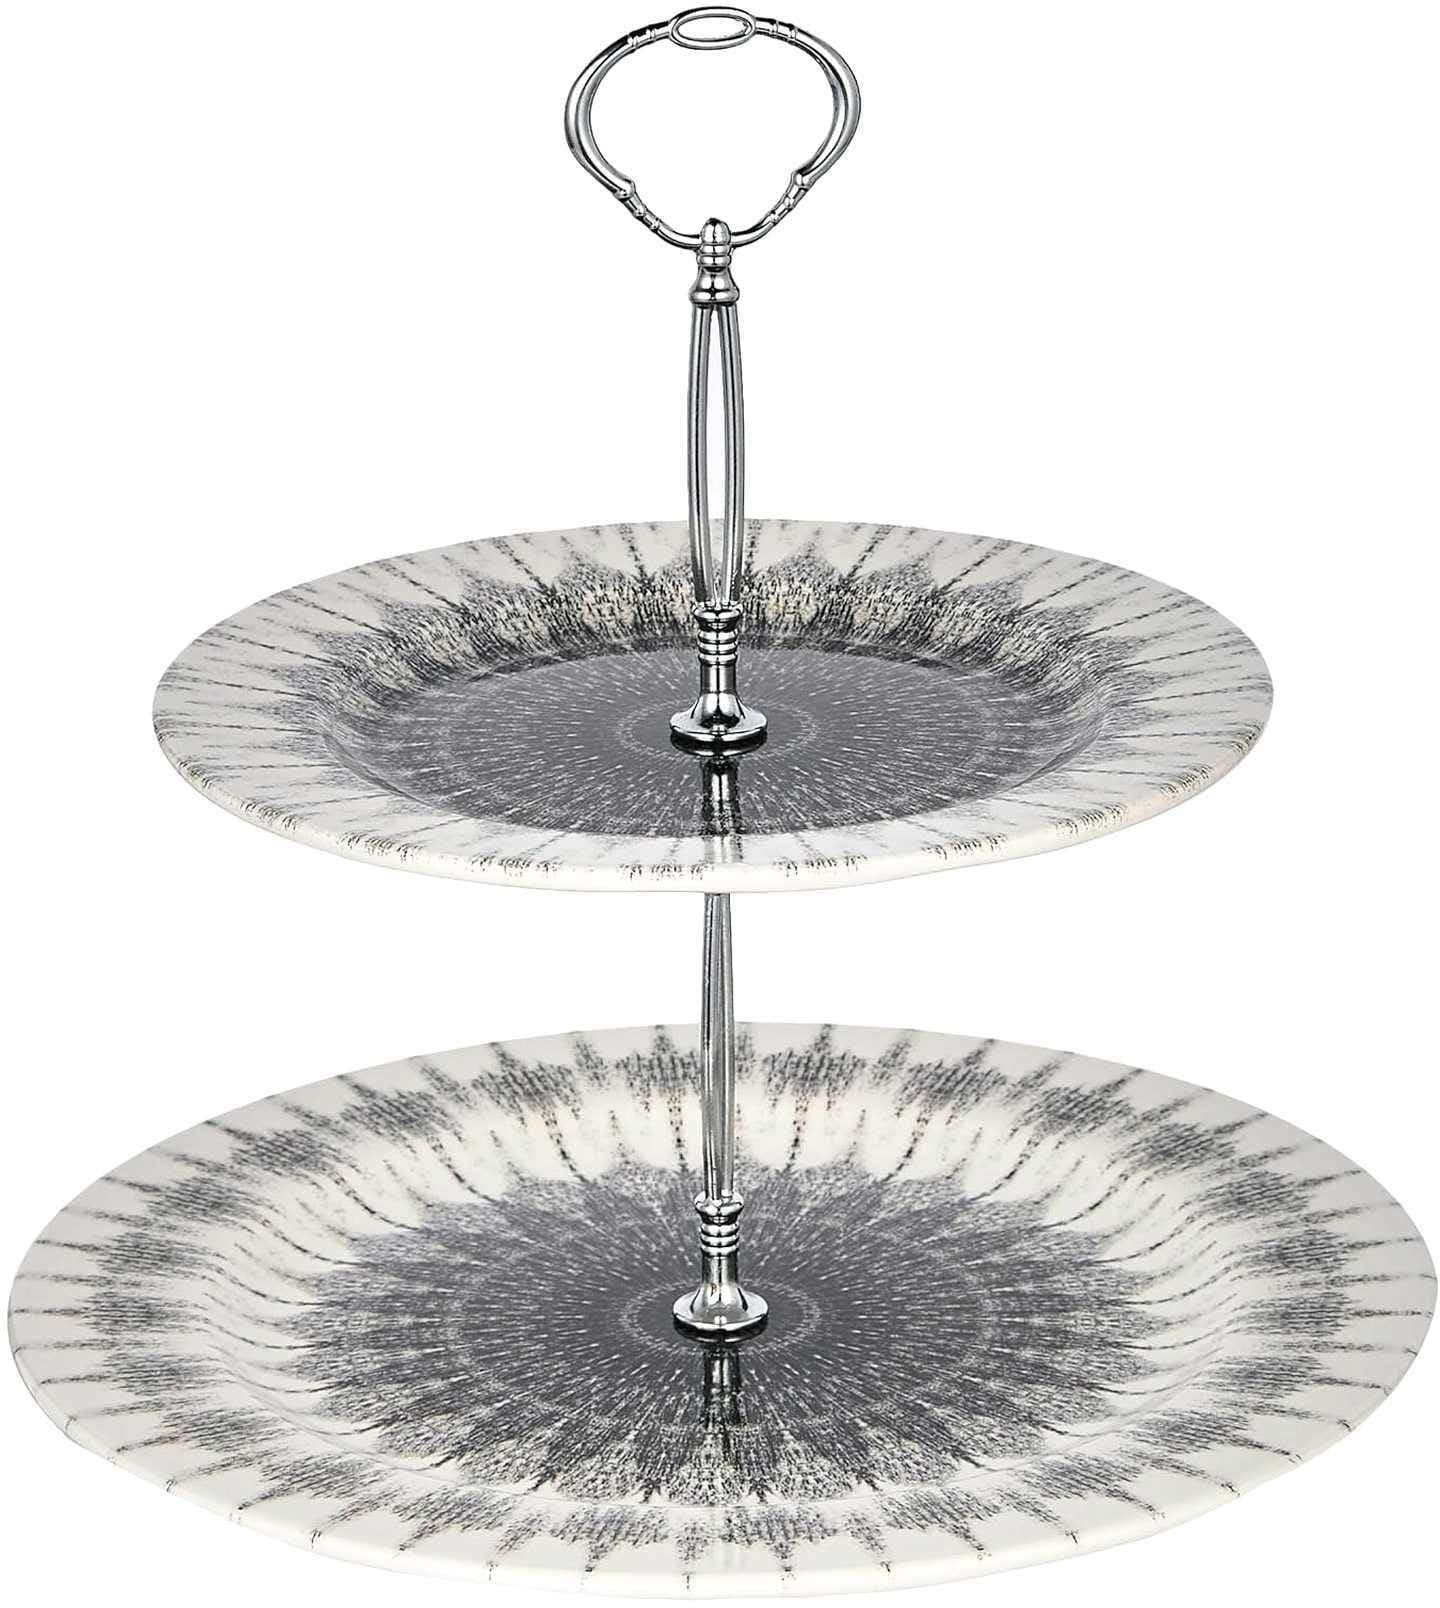 Cosmic 2-Tier Cake Stand